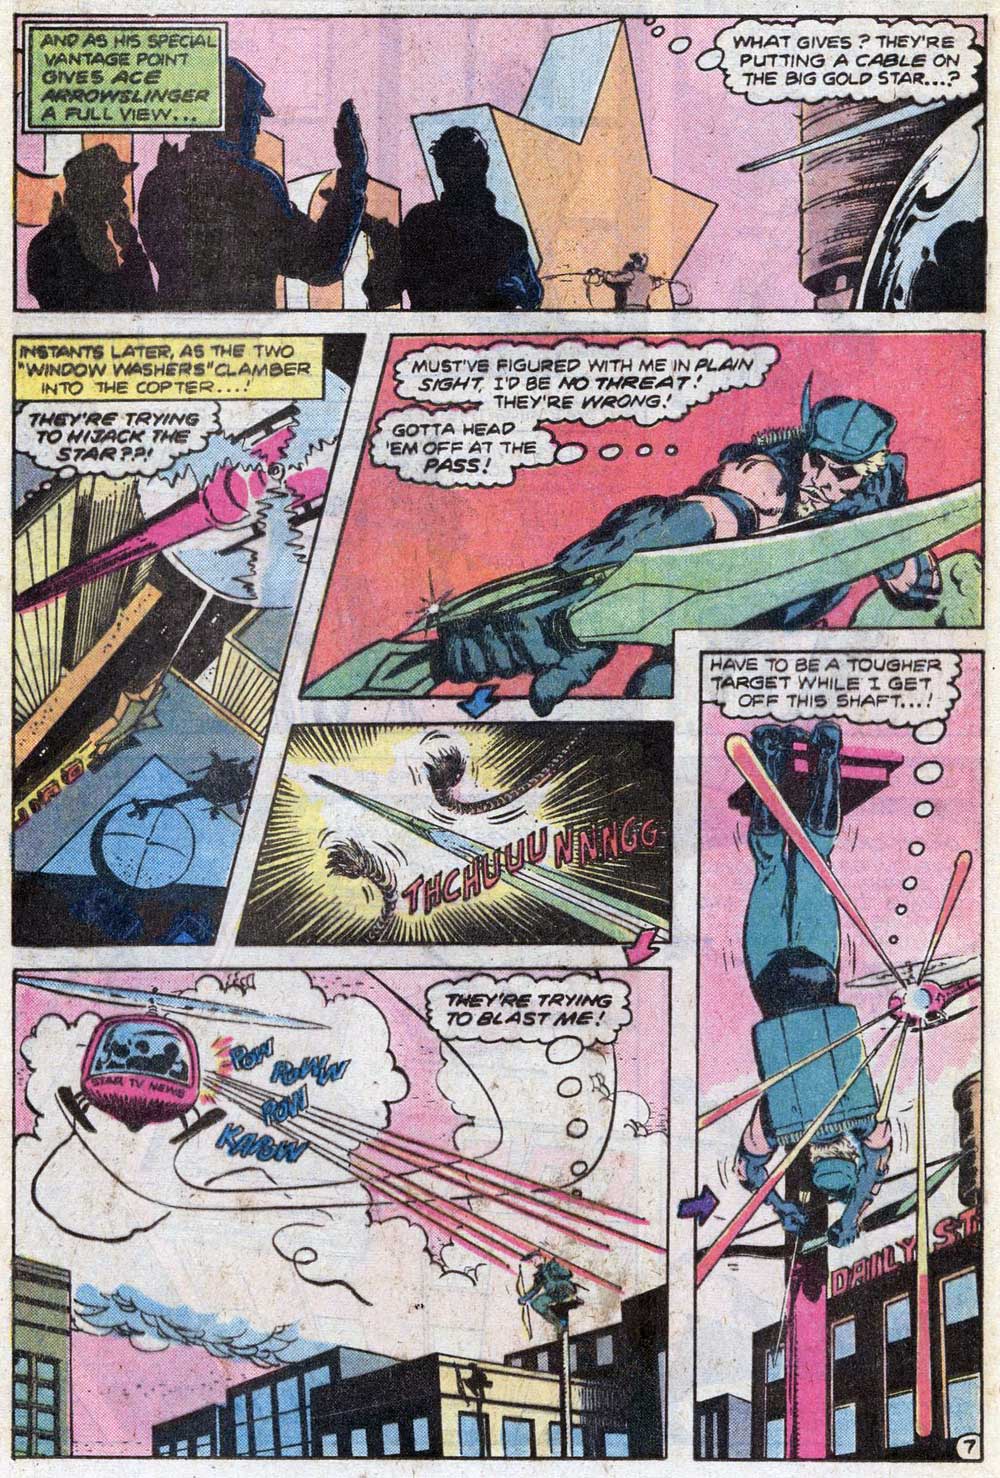 WORLD'S FINEST #266 - "I Shot an Arrow into the Air" written by Bob Haney, and art by Trevor Von Eeden and Rodin Rodriguez